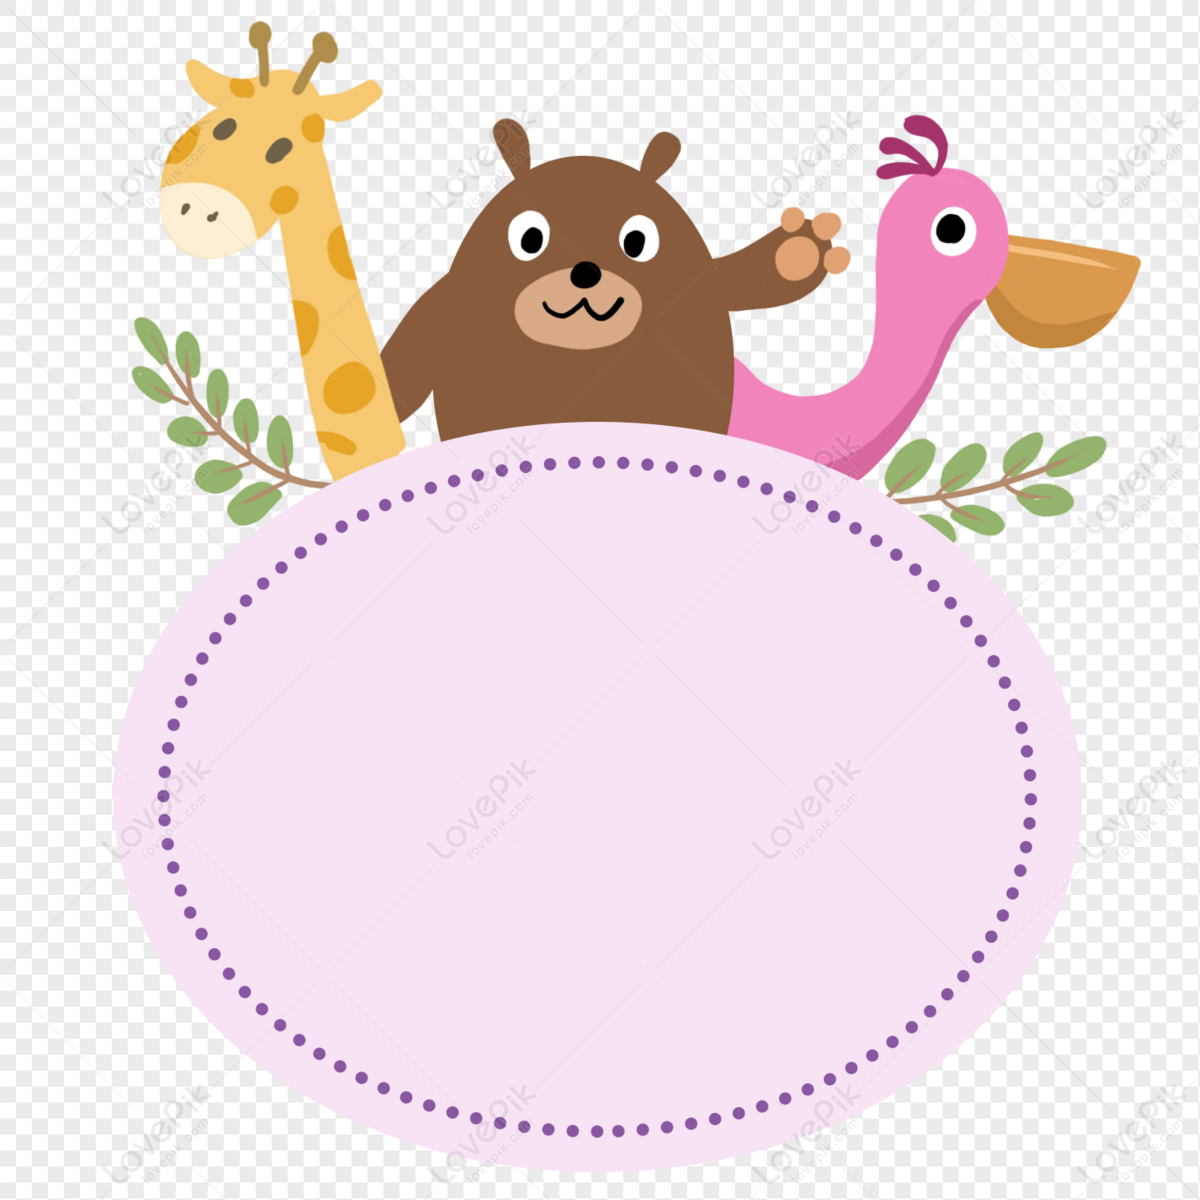 Cartoon Little Animal Border PNG Transparent Image And Clipart Image For  Free Download - Lovepik | 401516797